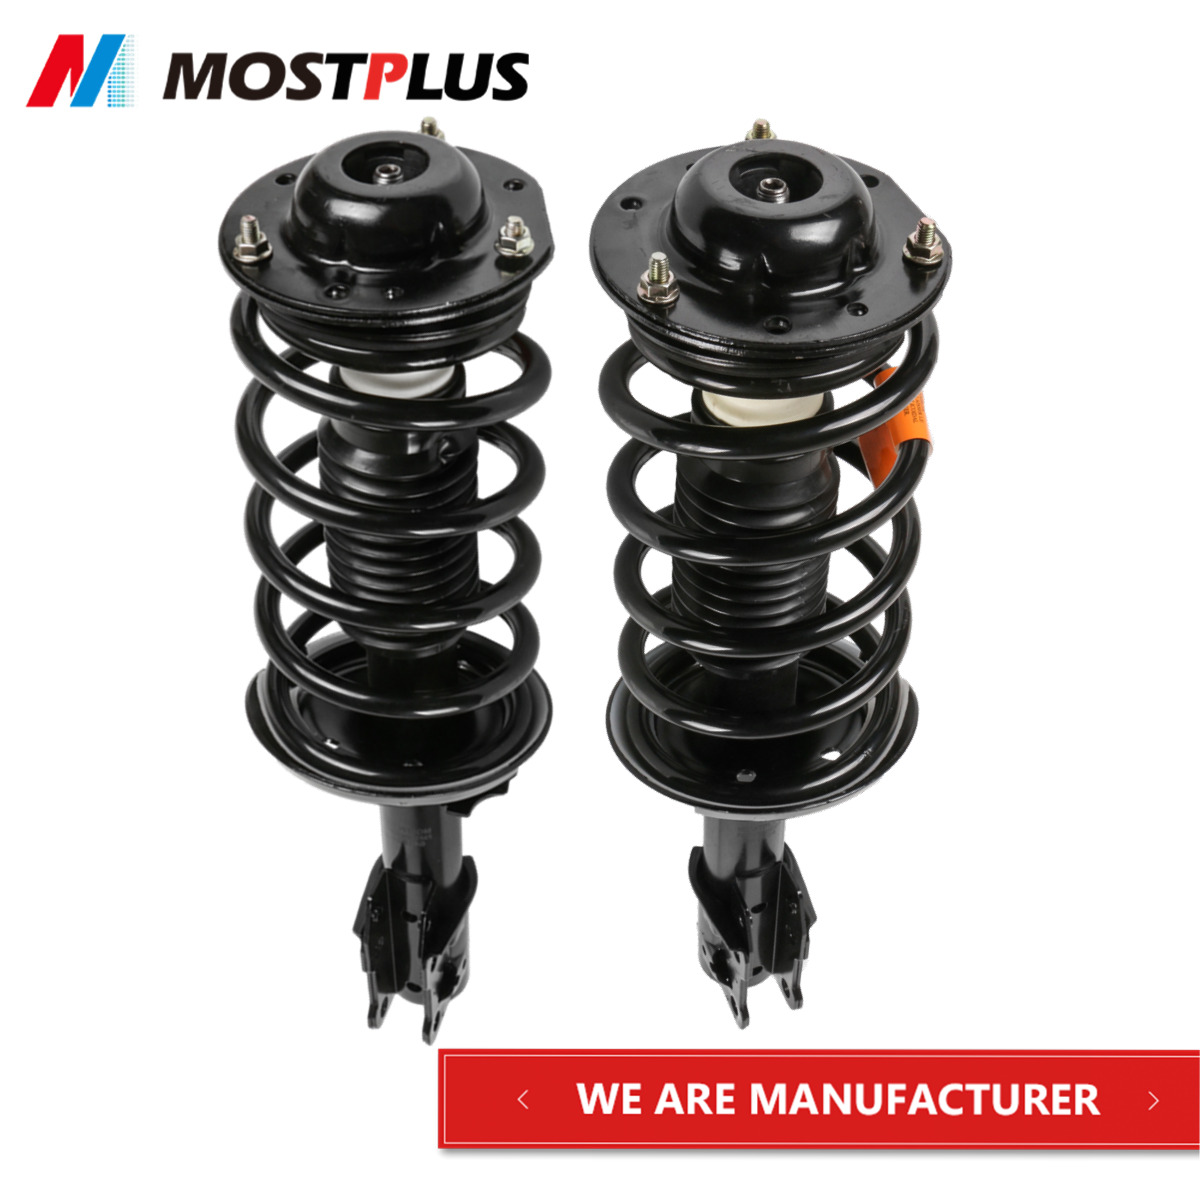 2PCS Front Complete Shock Struts w/ Springs Assembly For Chevy Malibu Pontiac G6